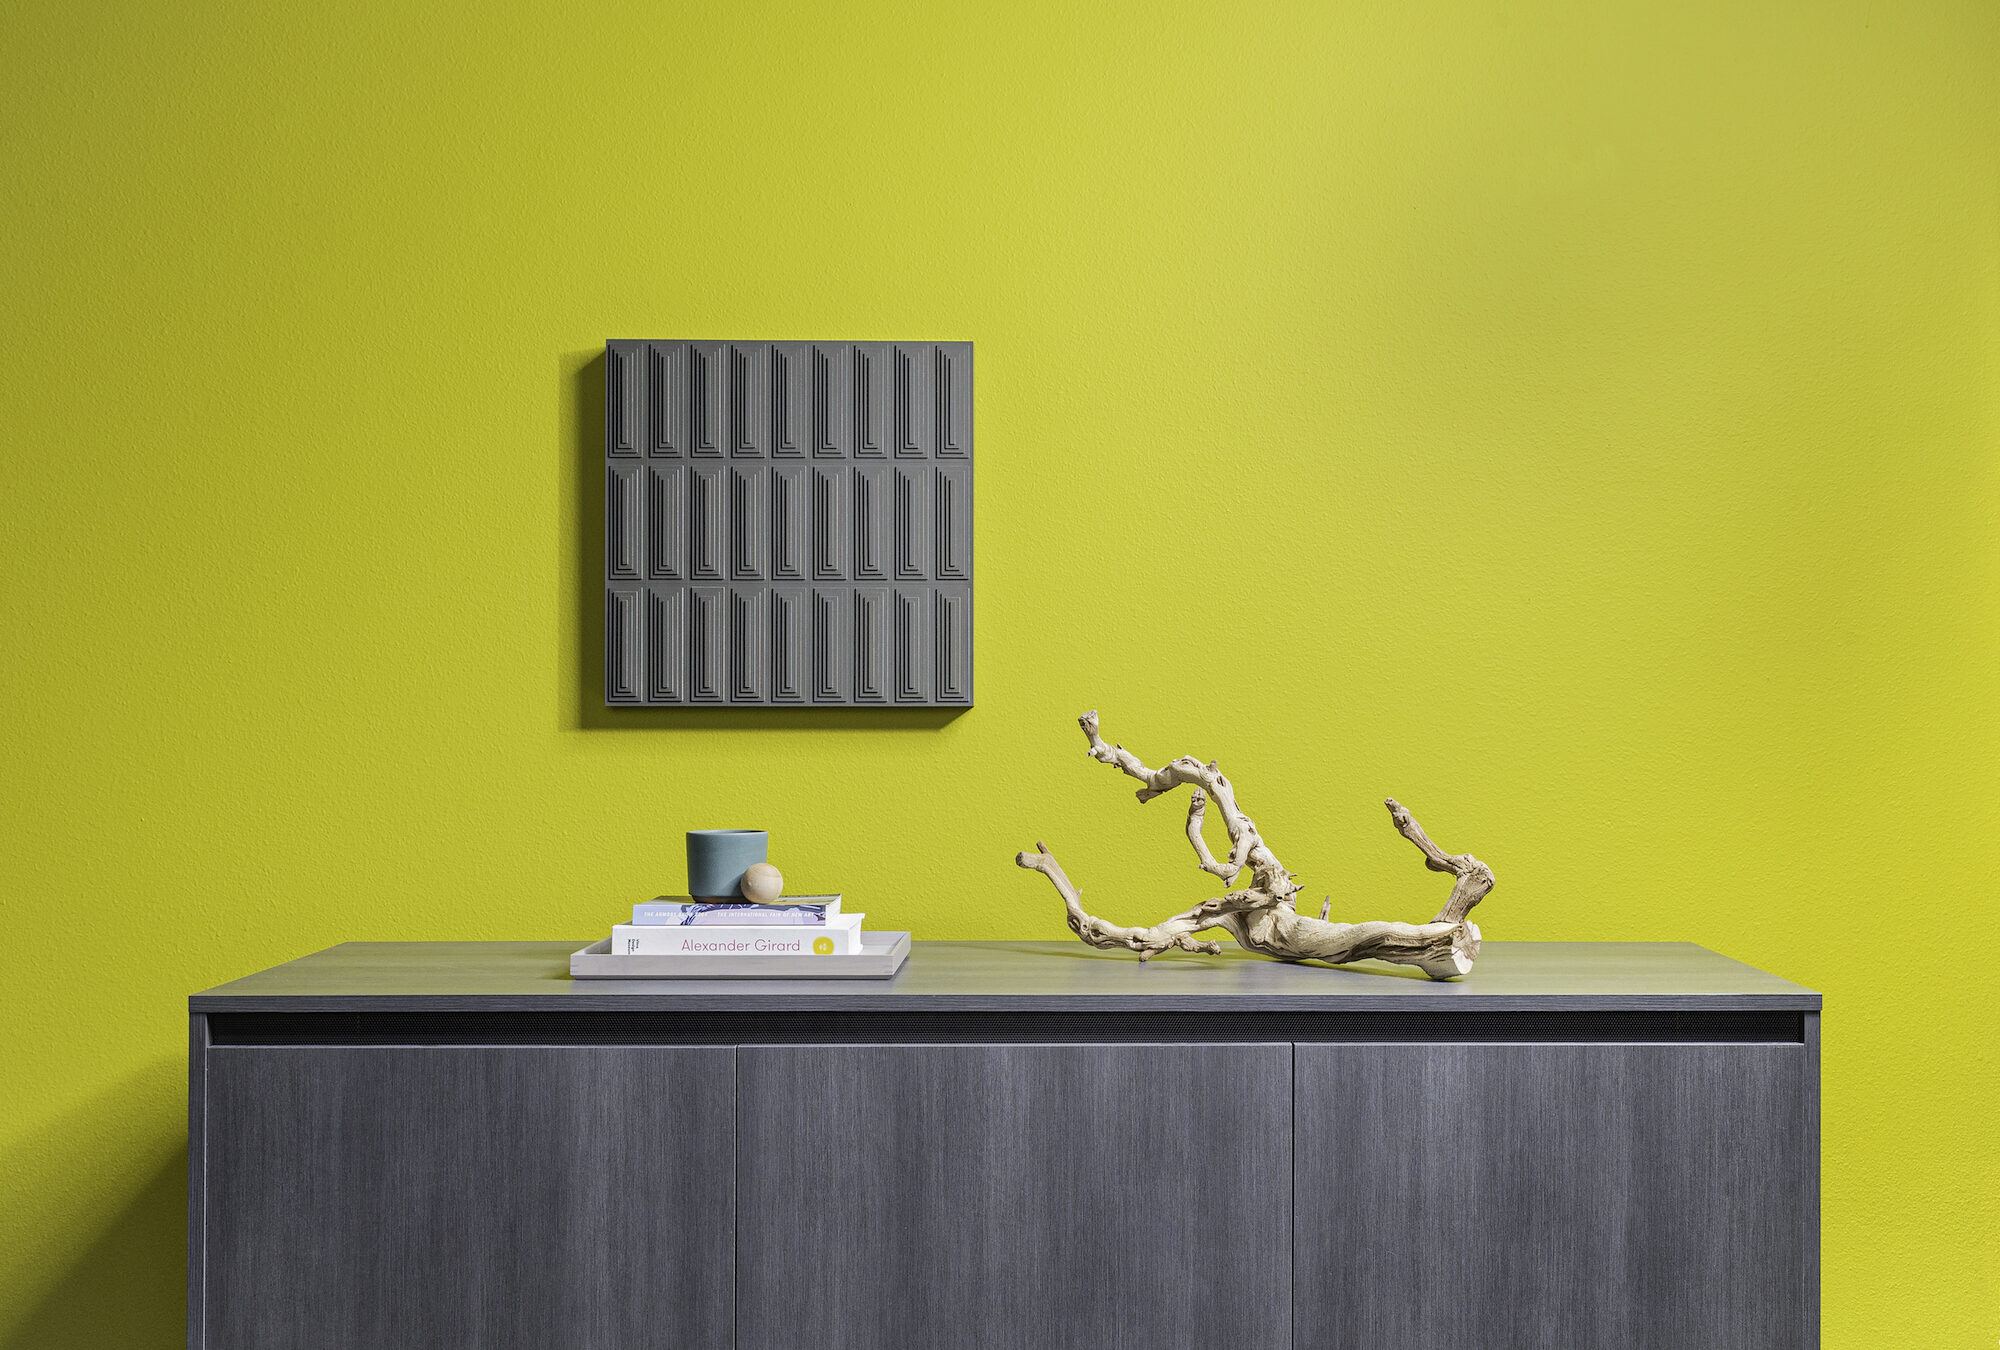 A long rectangular wall art piece hangs on a chartreuse wall. The piece has repeating diamond shapes in gray and the background felt is a bight orange.